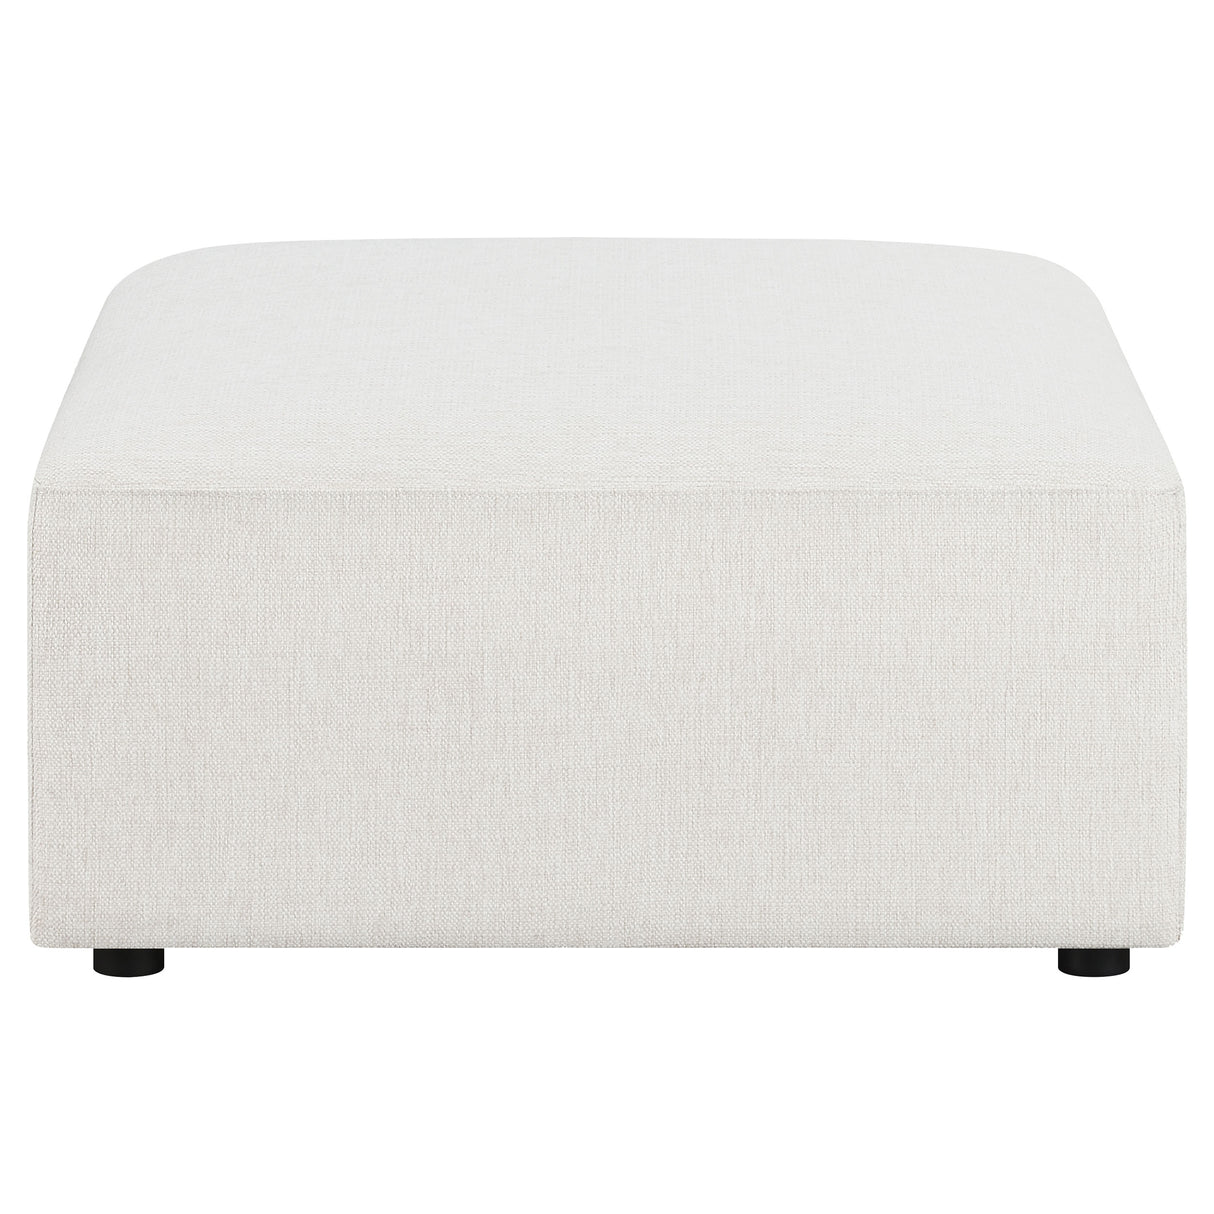 Ottoman - Freddie Upholstered Square Ottoman Pearl